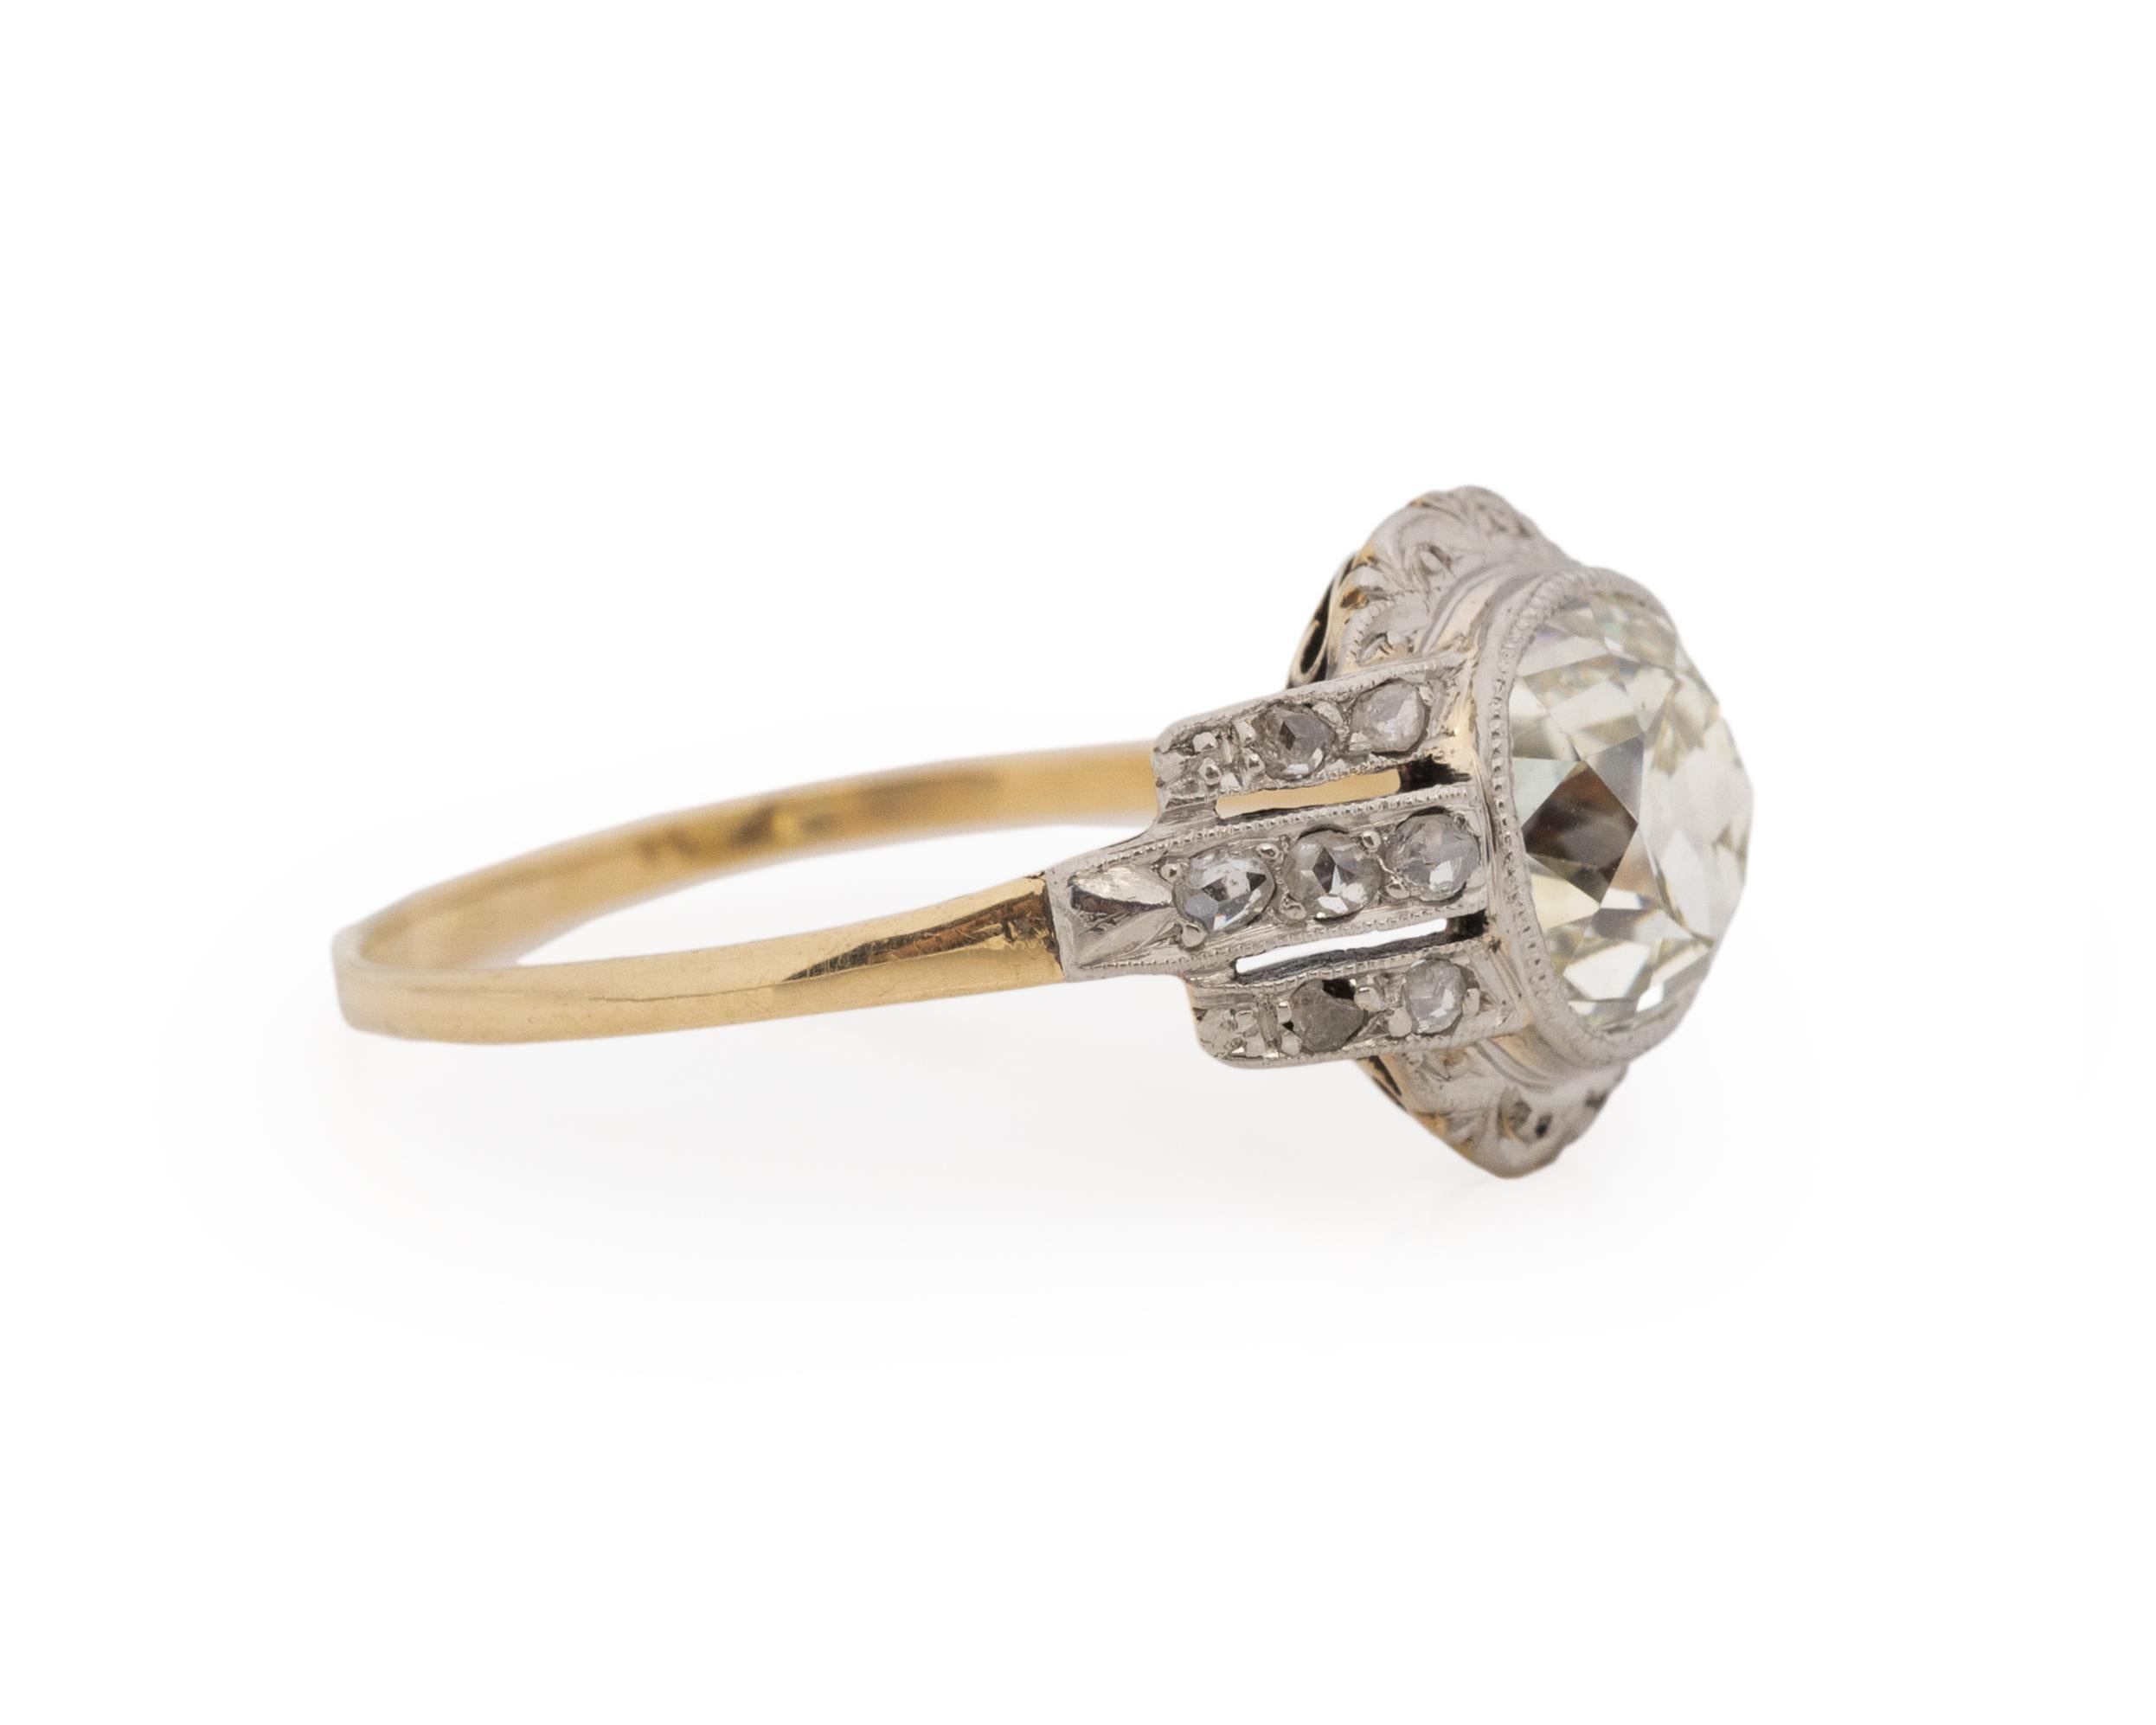 Ring Size: 8.5
Metal Type: Platinum Head, 14K Gold Shank [Hallmarked, and Tested]
Weight: 3.0 grams

Center Diamond Details:
GIA REPORT #: 2417916474
Weight: 2.06ct
Cut: Old Mine Brilliant
Color: N
Clarity: VS1
Measurements: 7.68mm x 7.38mm x